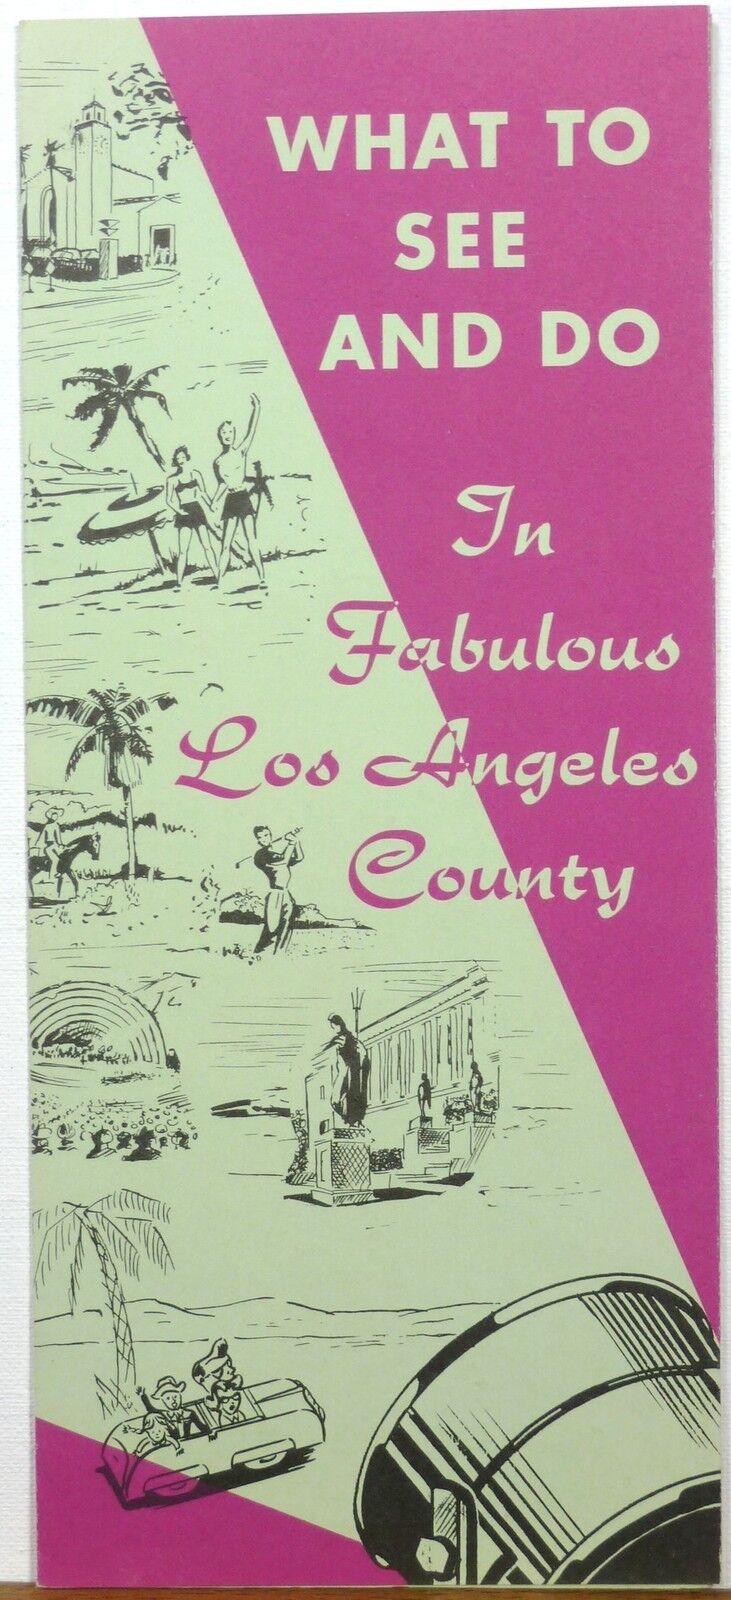 1957 Los Angeles County California what to do and see vintage tourist brochure b